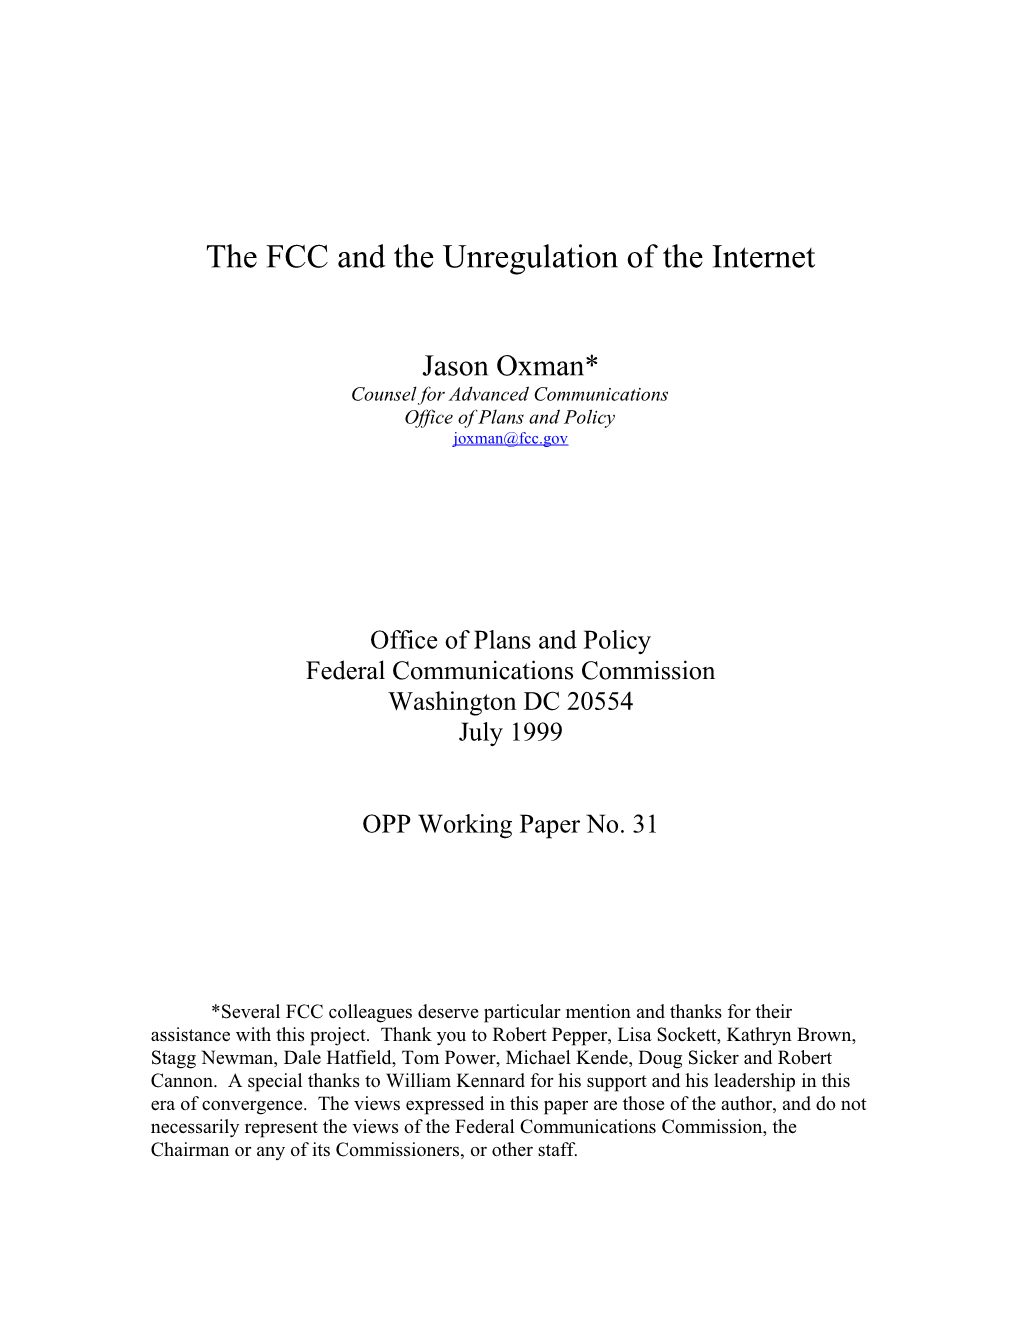 The FCC and the Unregulation of the Internet